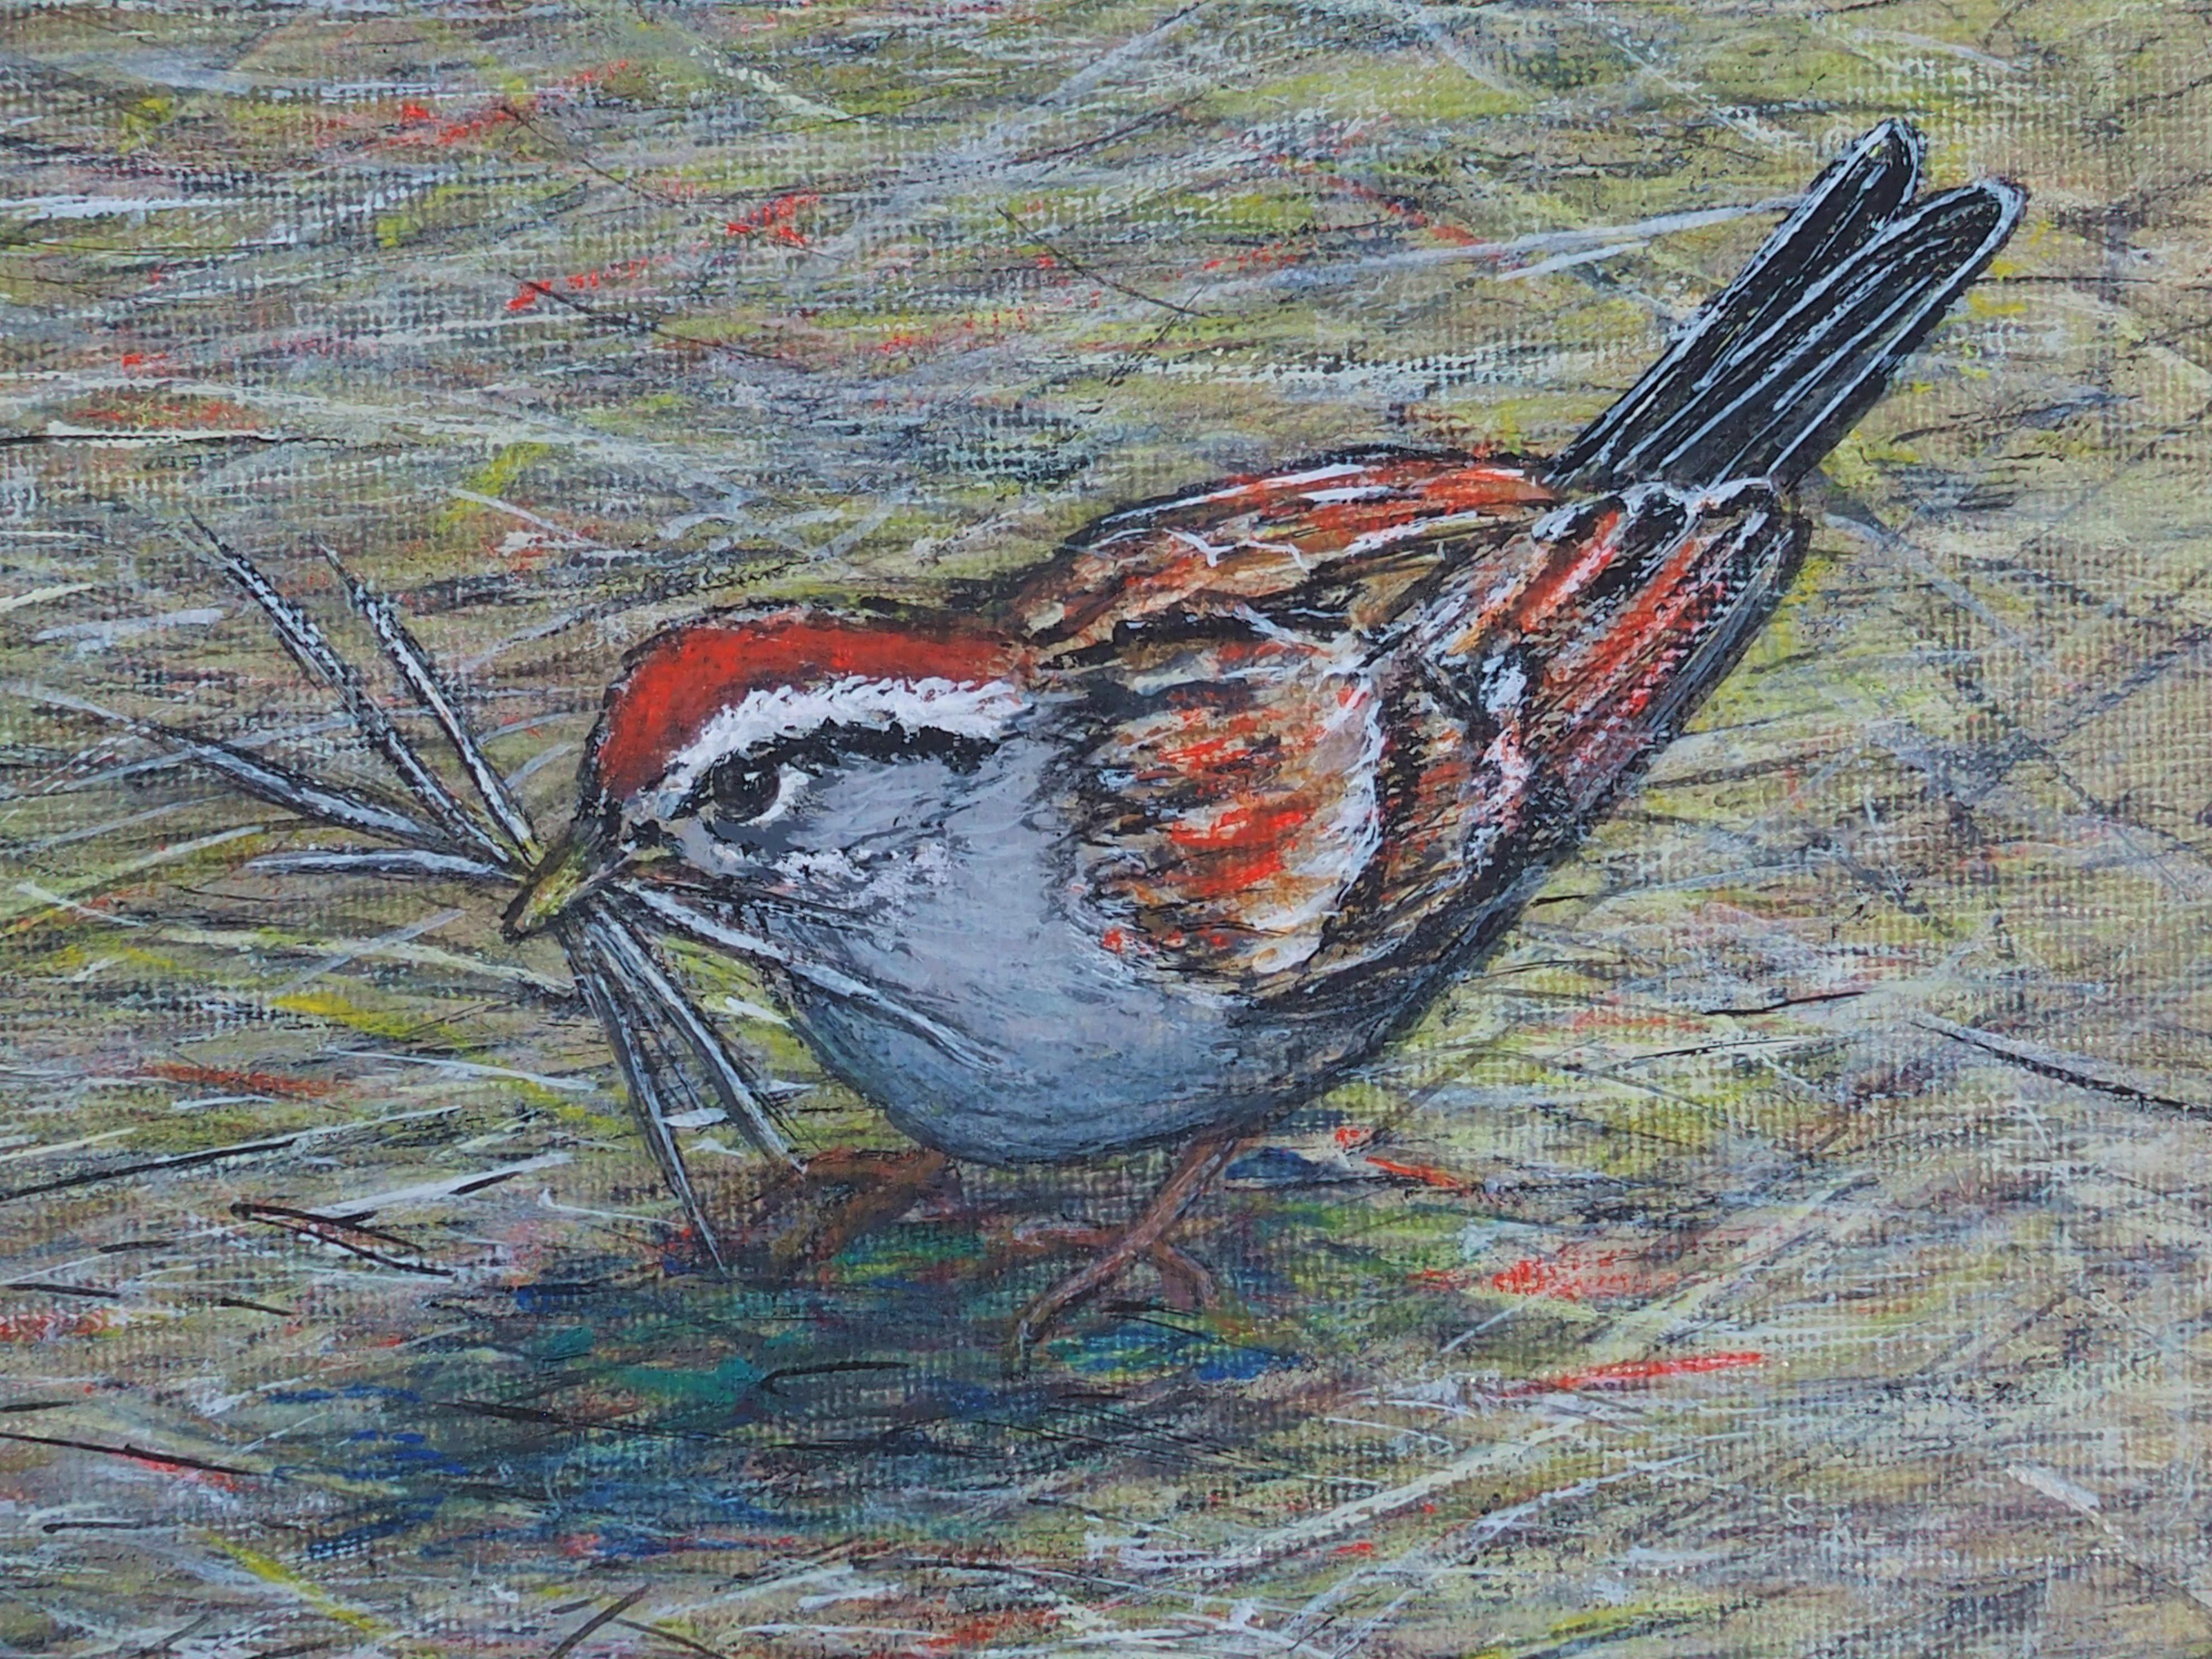 <p>Artist Comments<br />Artist Jennifer Ross observed two sparrows gathering grasses in her yard to start building their nest. She carefully studied their markings and mannerisms, working to bring their relationship and work ethic to life.</p><br